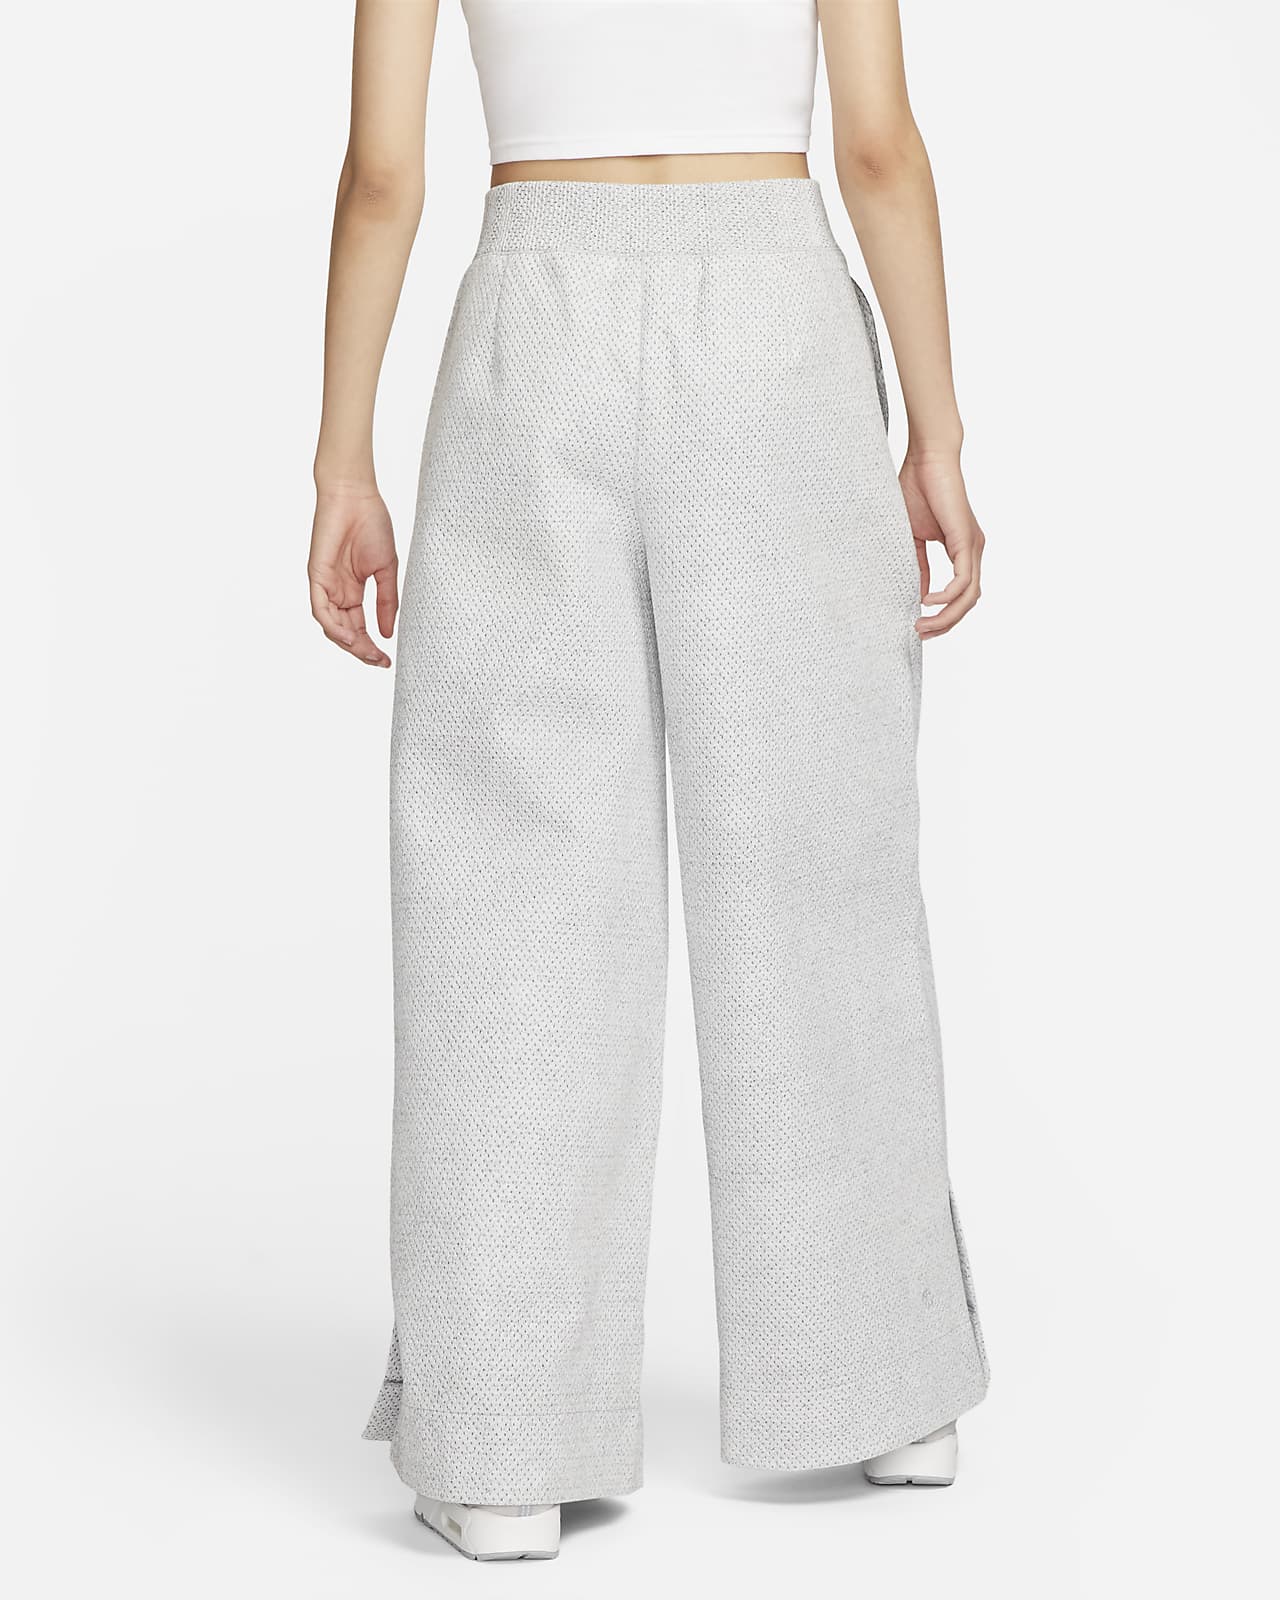 High Waisted Pants for Women